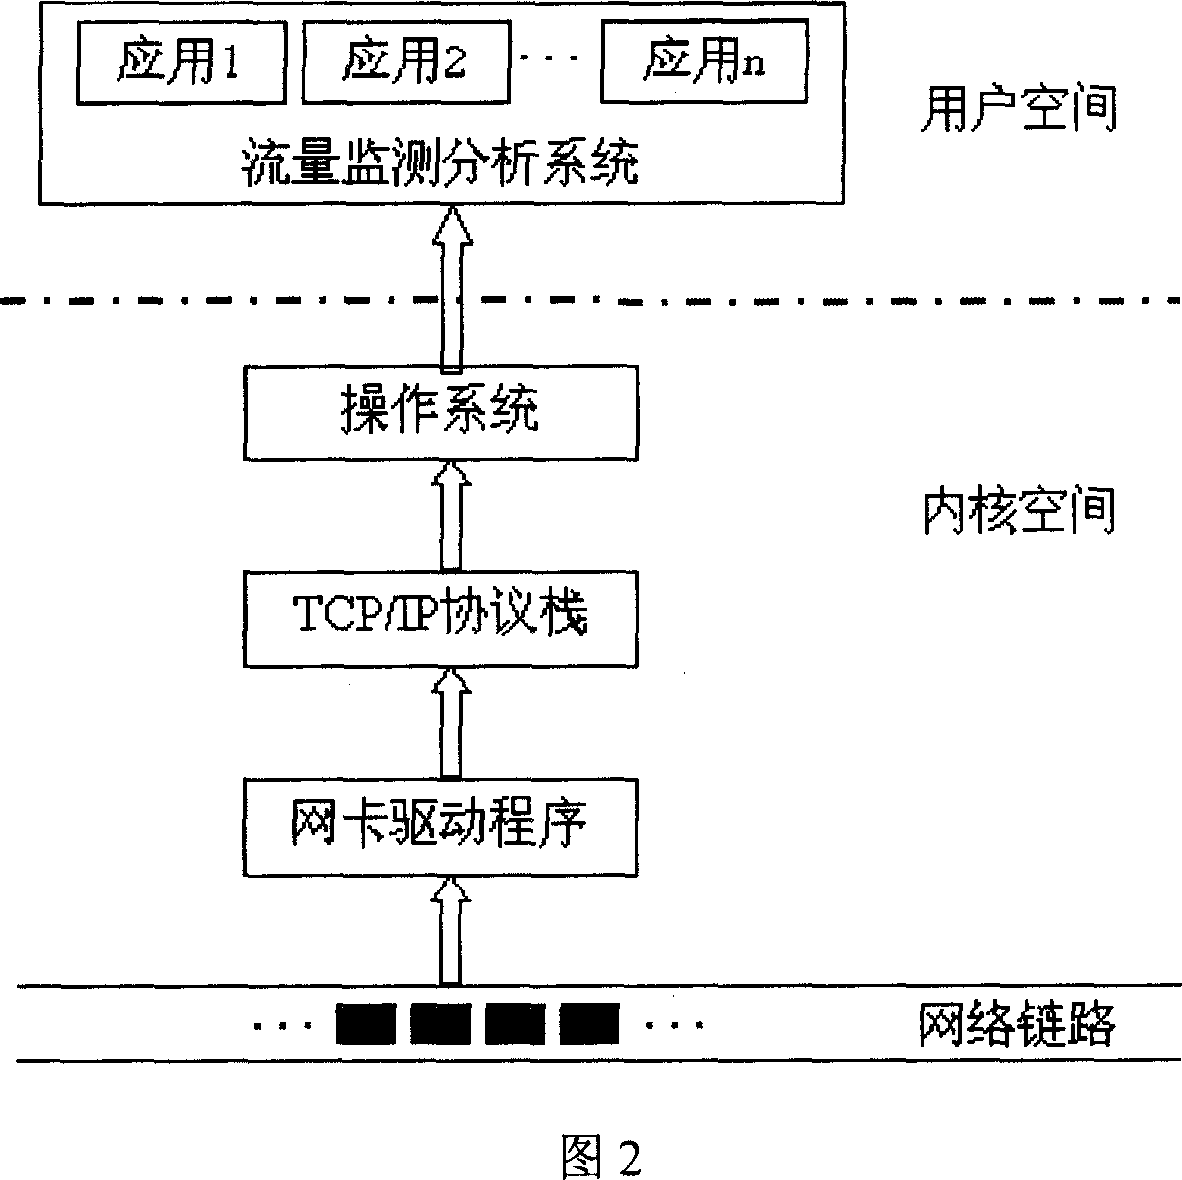 Method for realizing data packet catching based on sharing internal memory